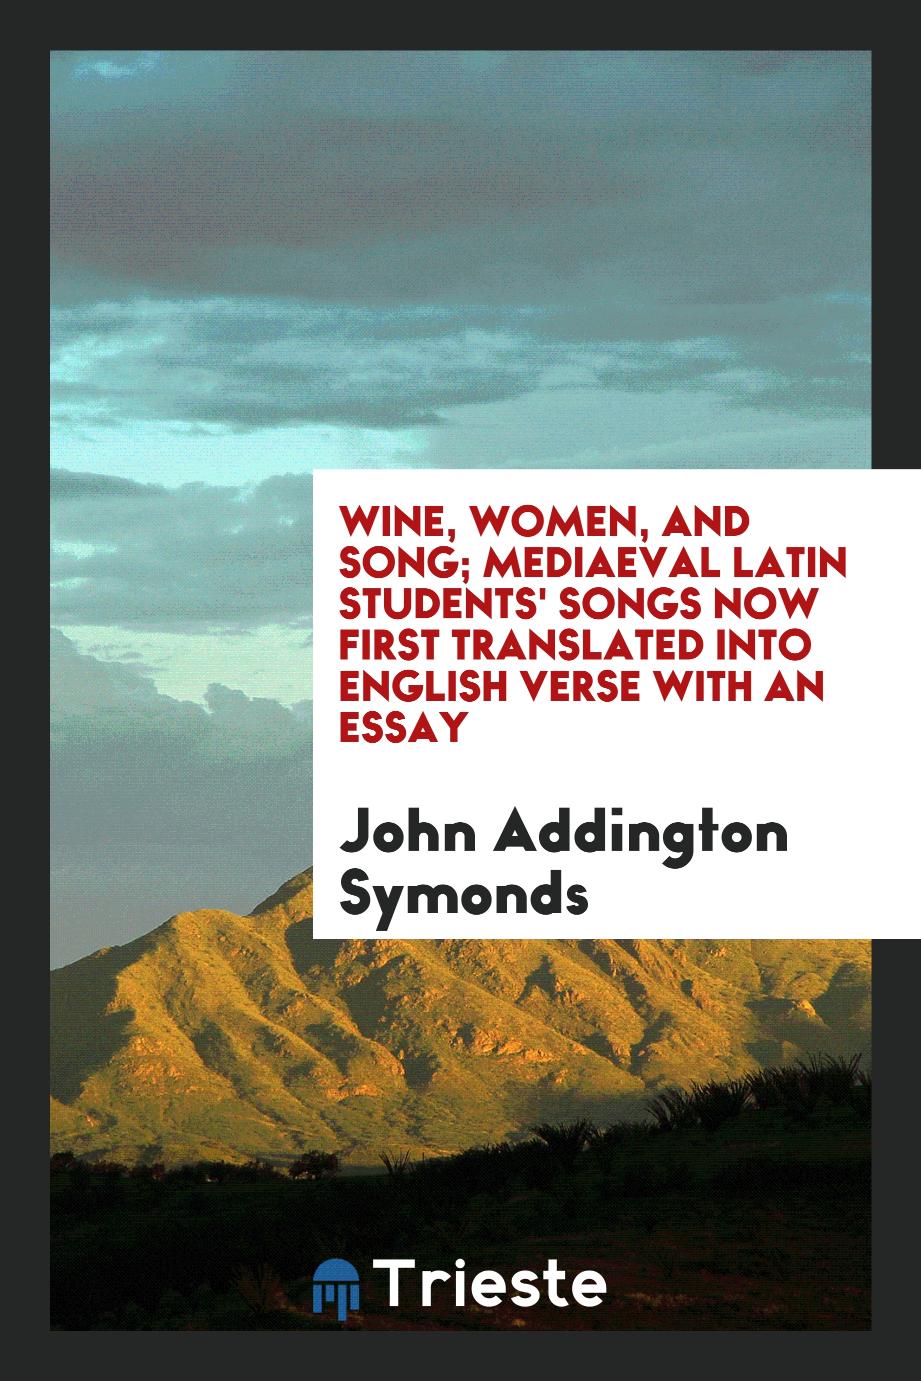 Wine, women, and song; mediaeval Latin students' songs now first translated into English verse with an essay